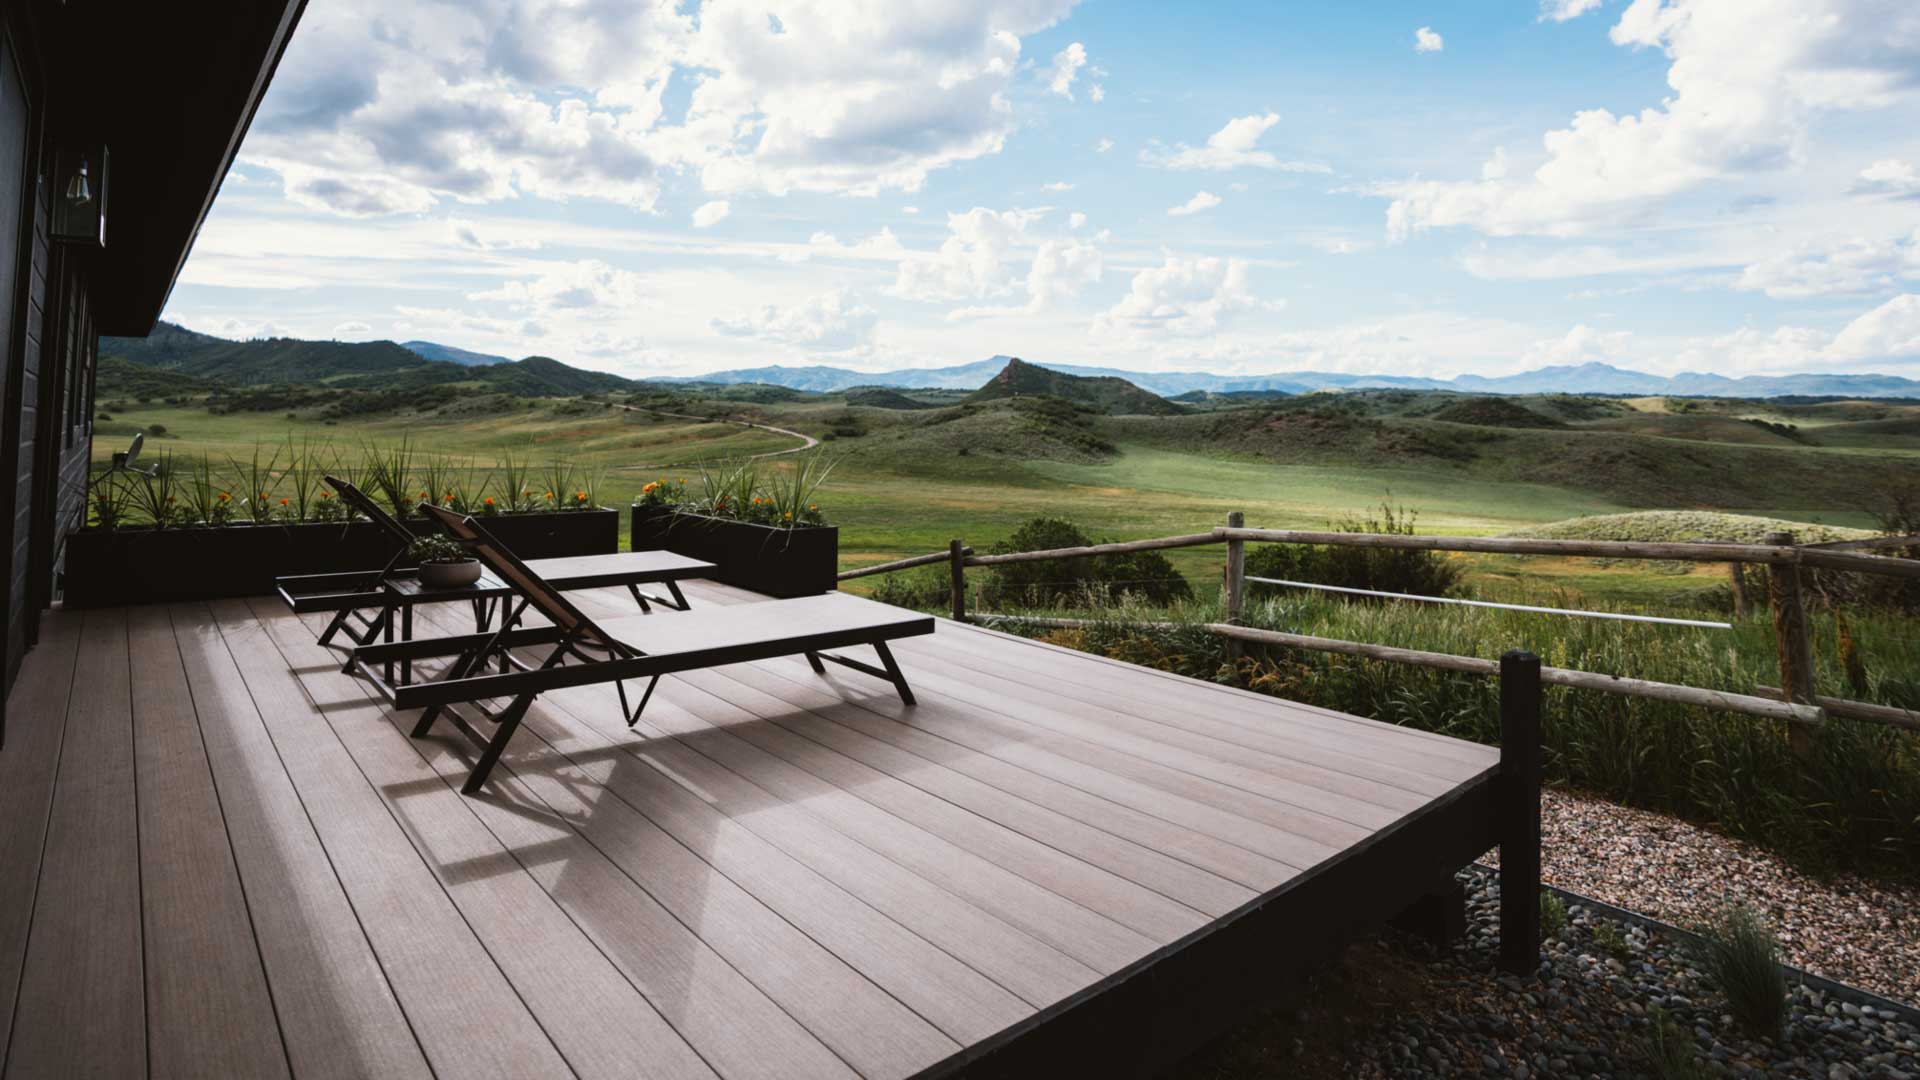 Two lounge chairs on a deck look out upon rolling hills in the Colorado landscape